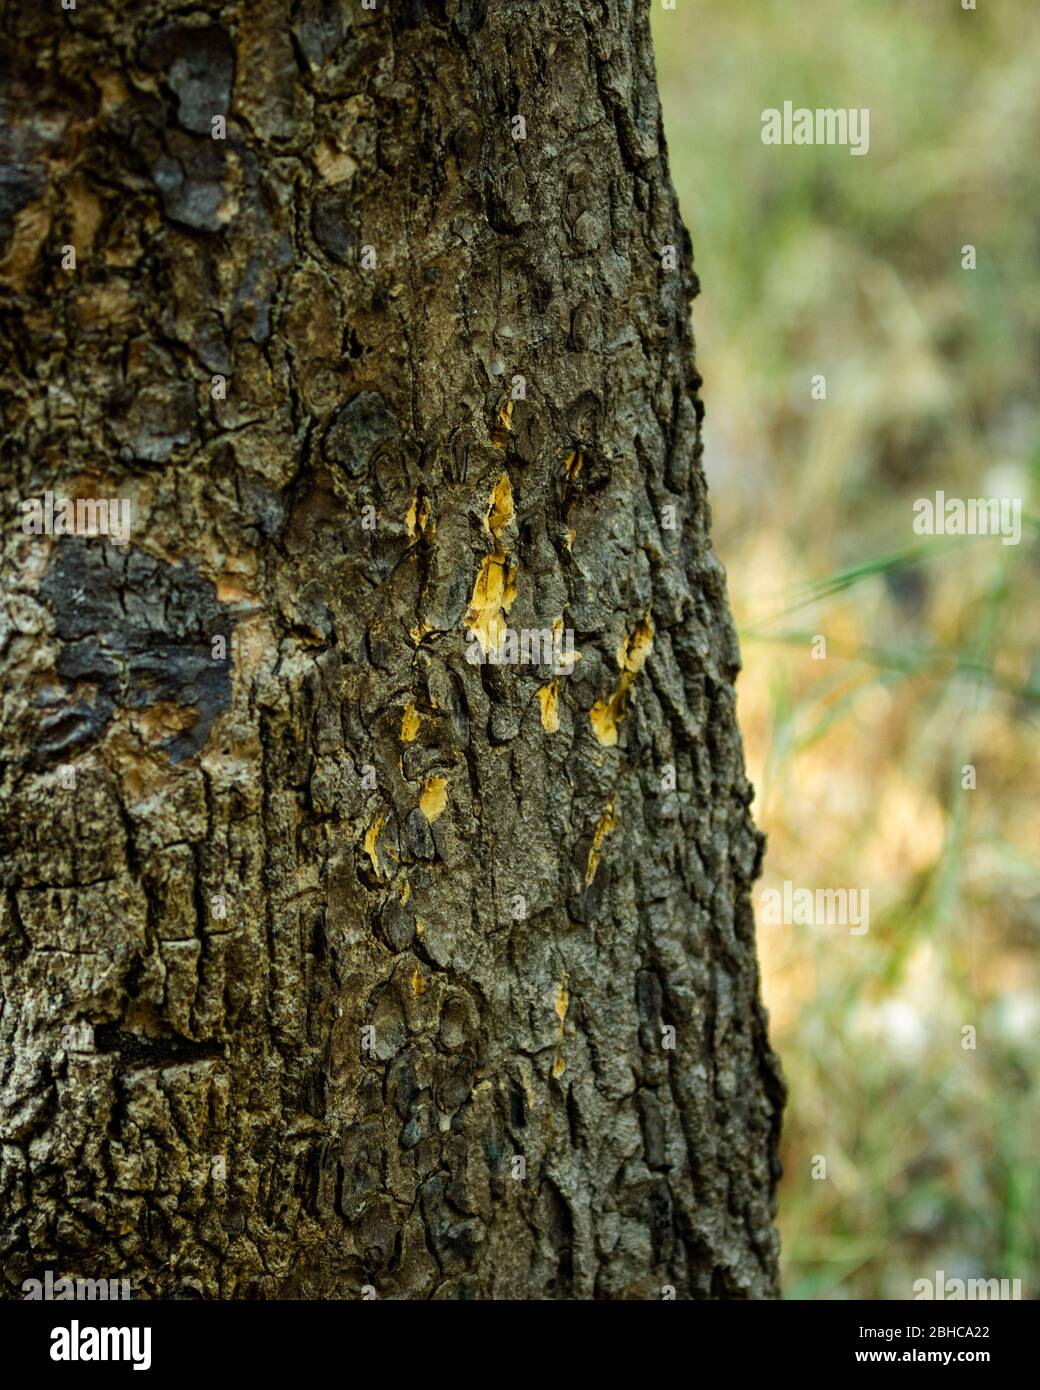 Tiger scratch marks on tree in portrait mode Stock Photo